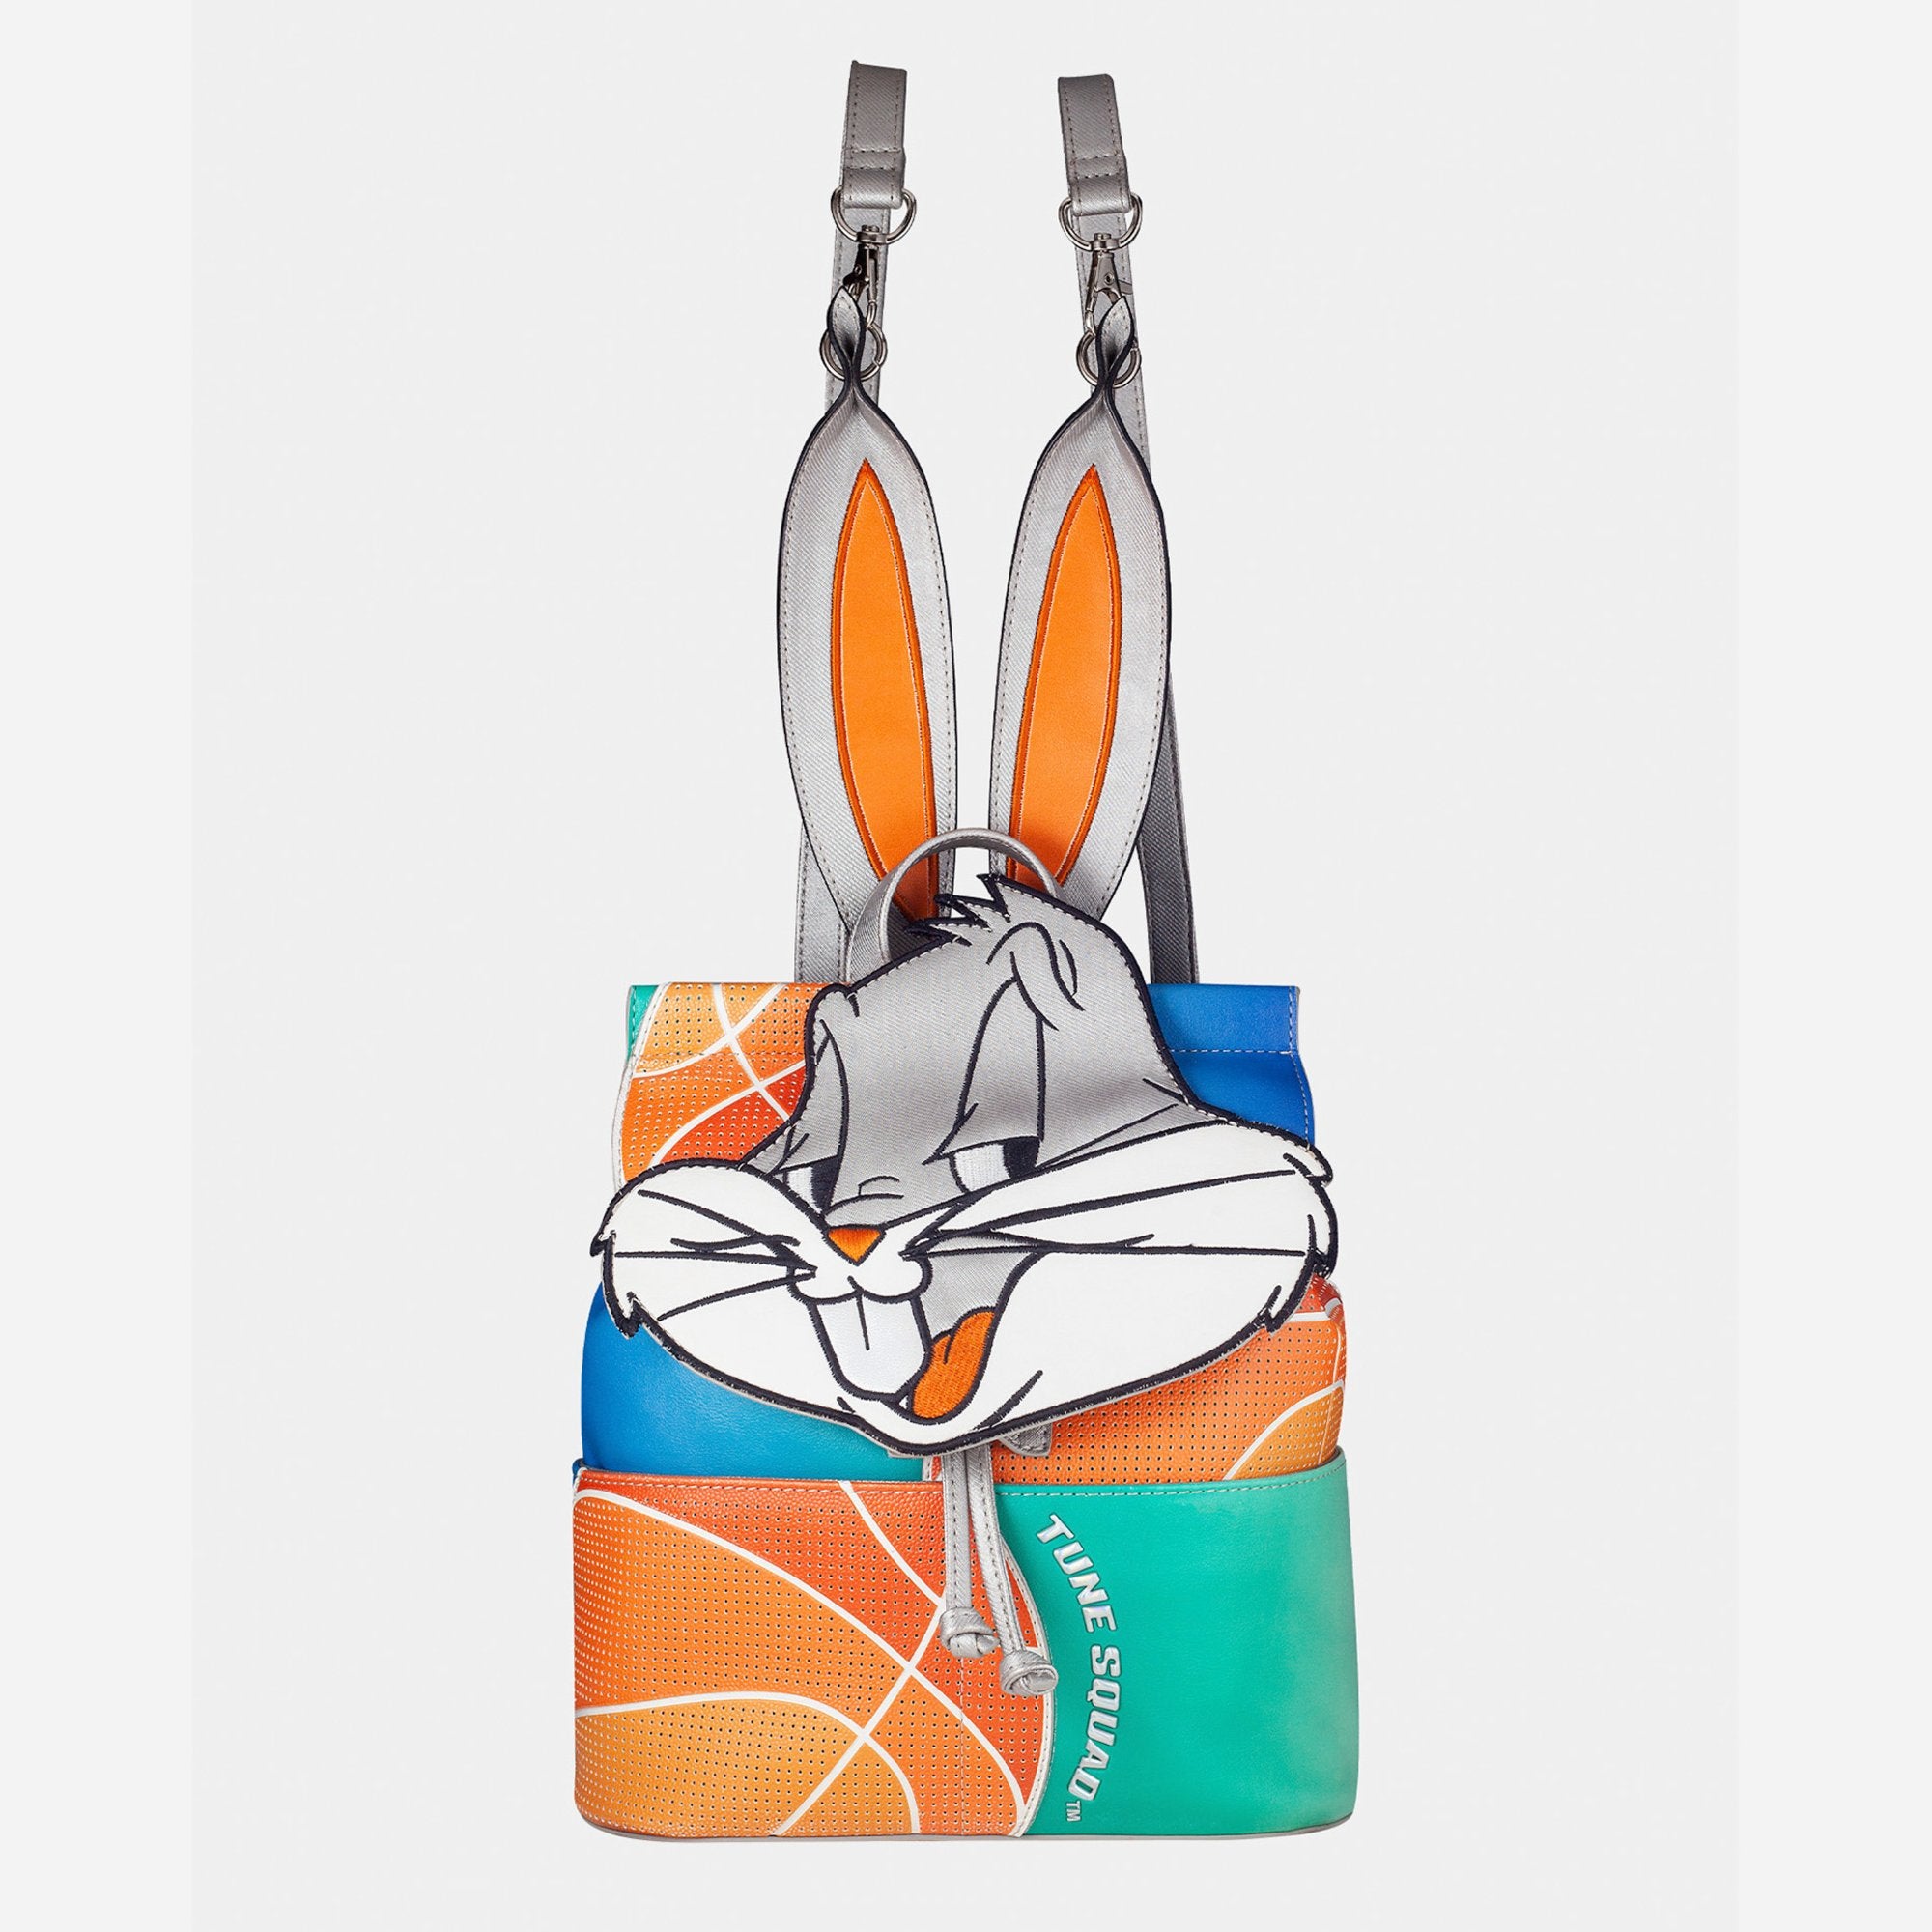 Space Jam 2 Backpack - Bugs Bunny